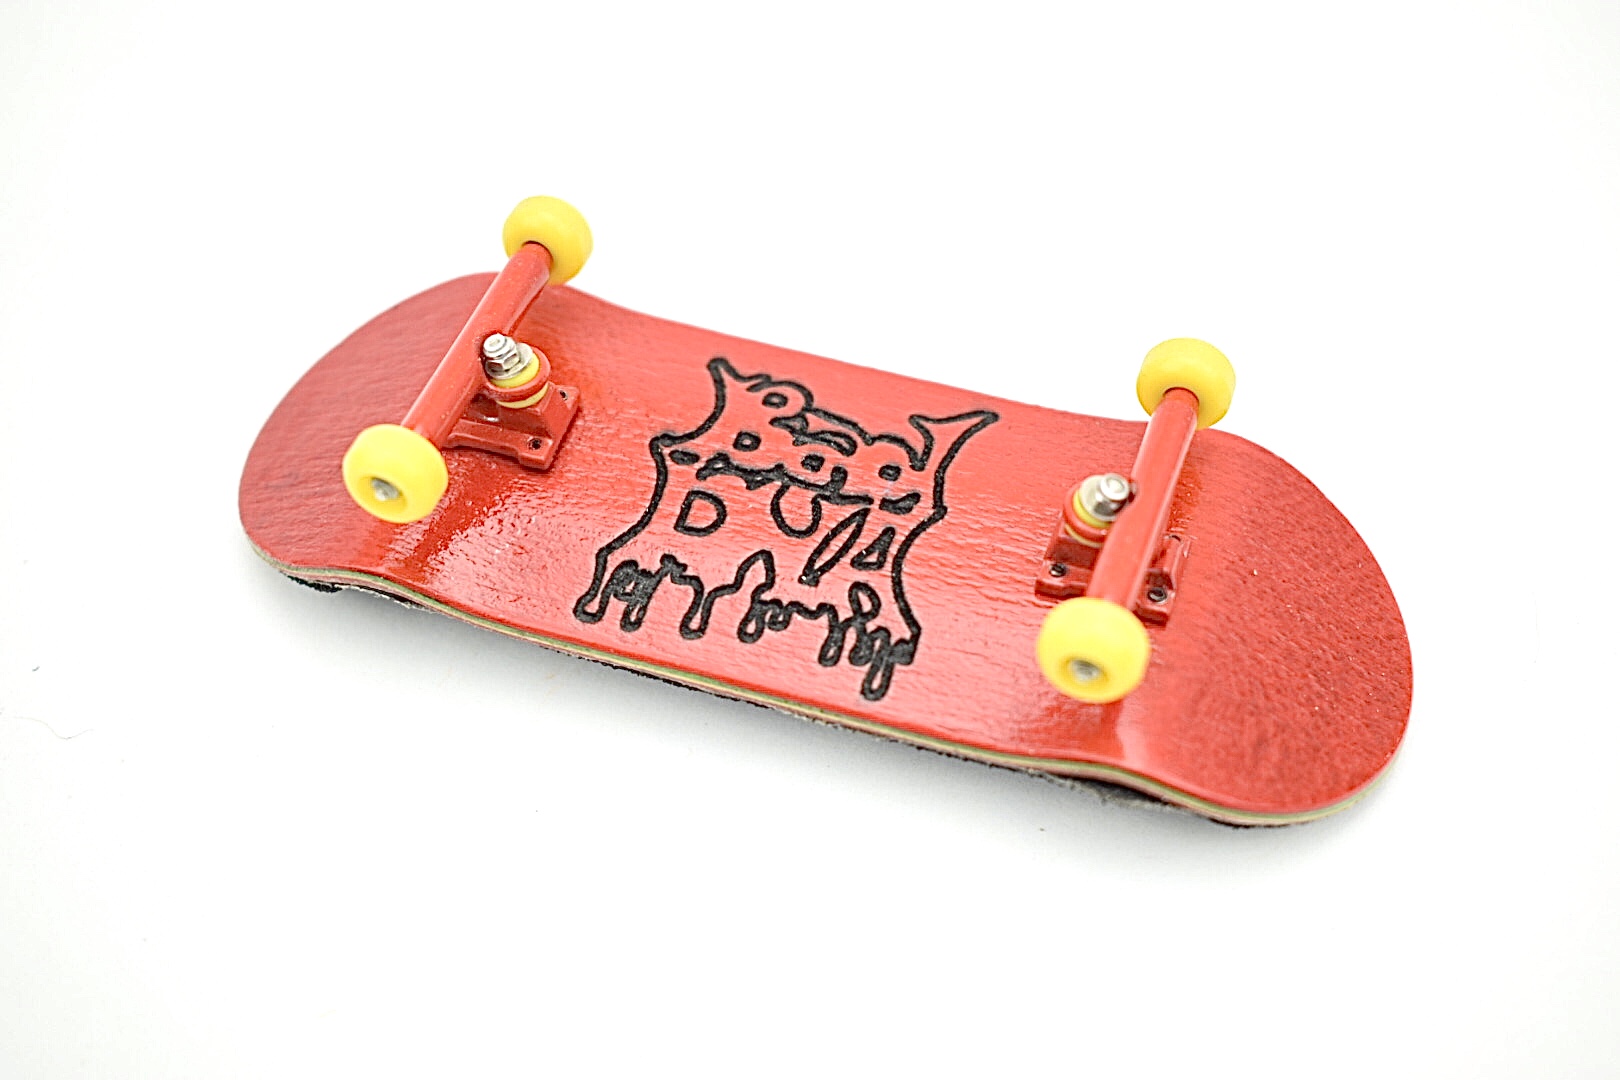 Fingerboard Online - Professional Fingerboards for Sale in the US